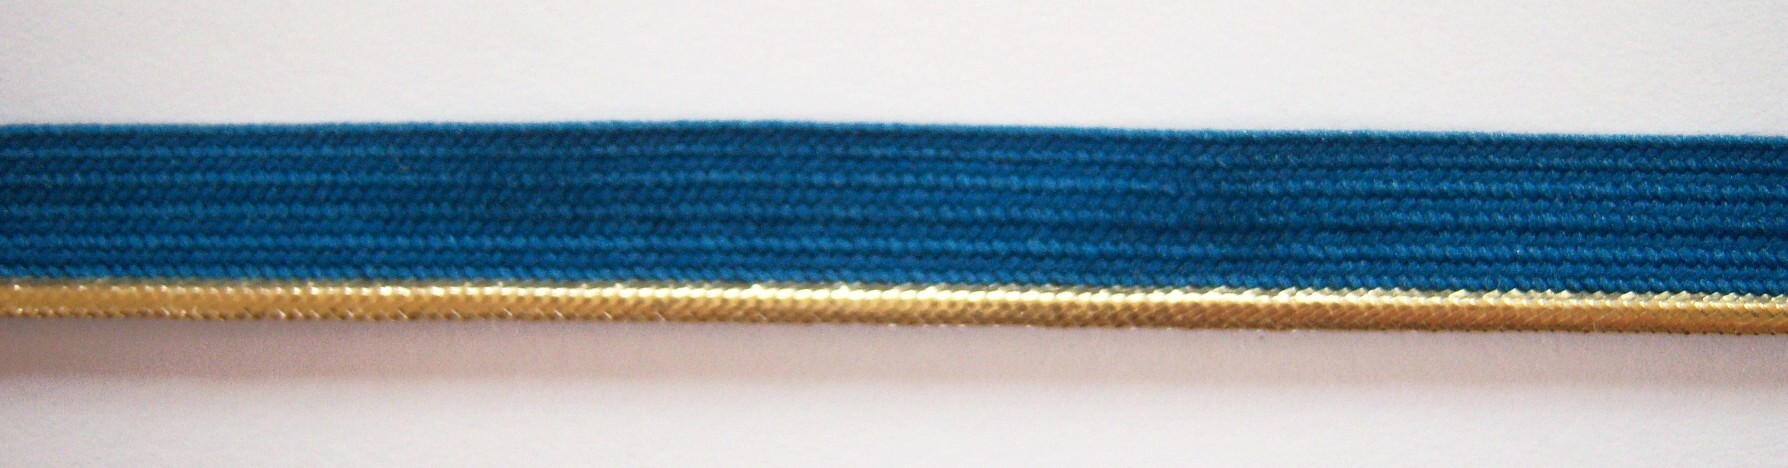 Regal Blue/Gold 1/8" Piping